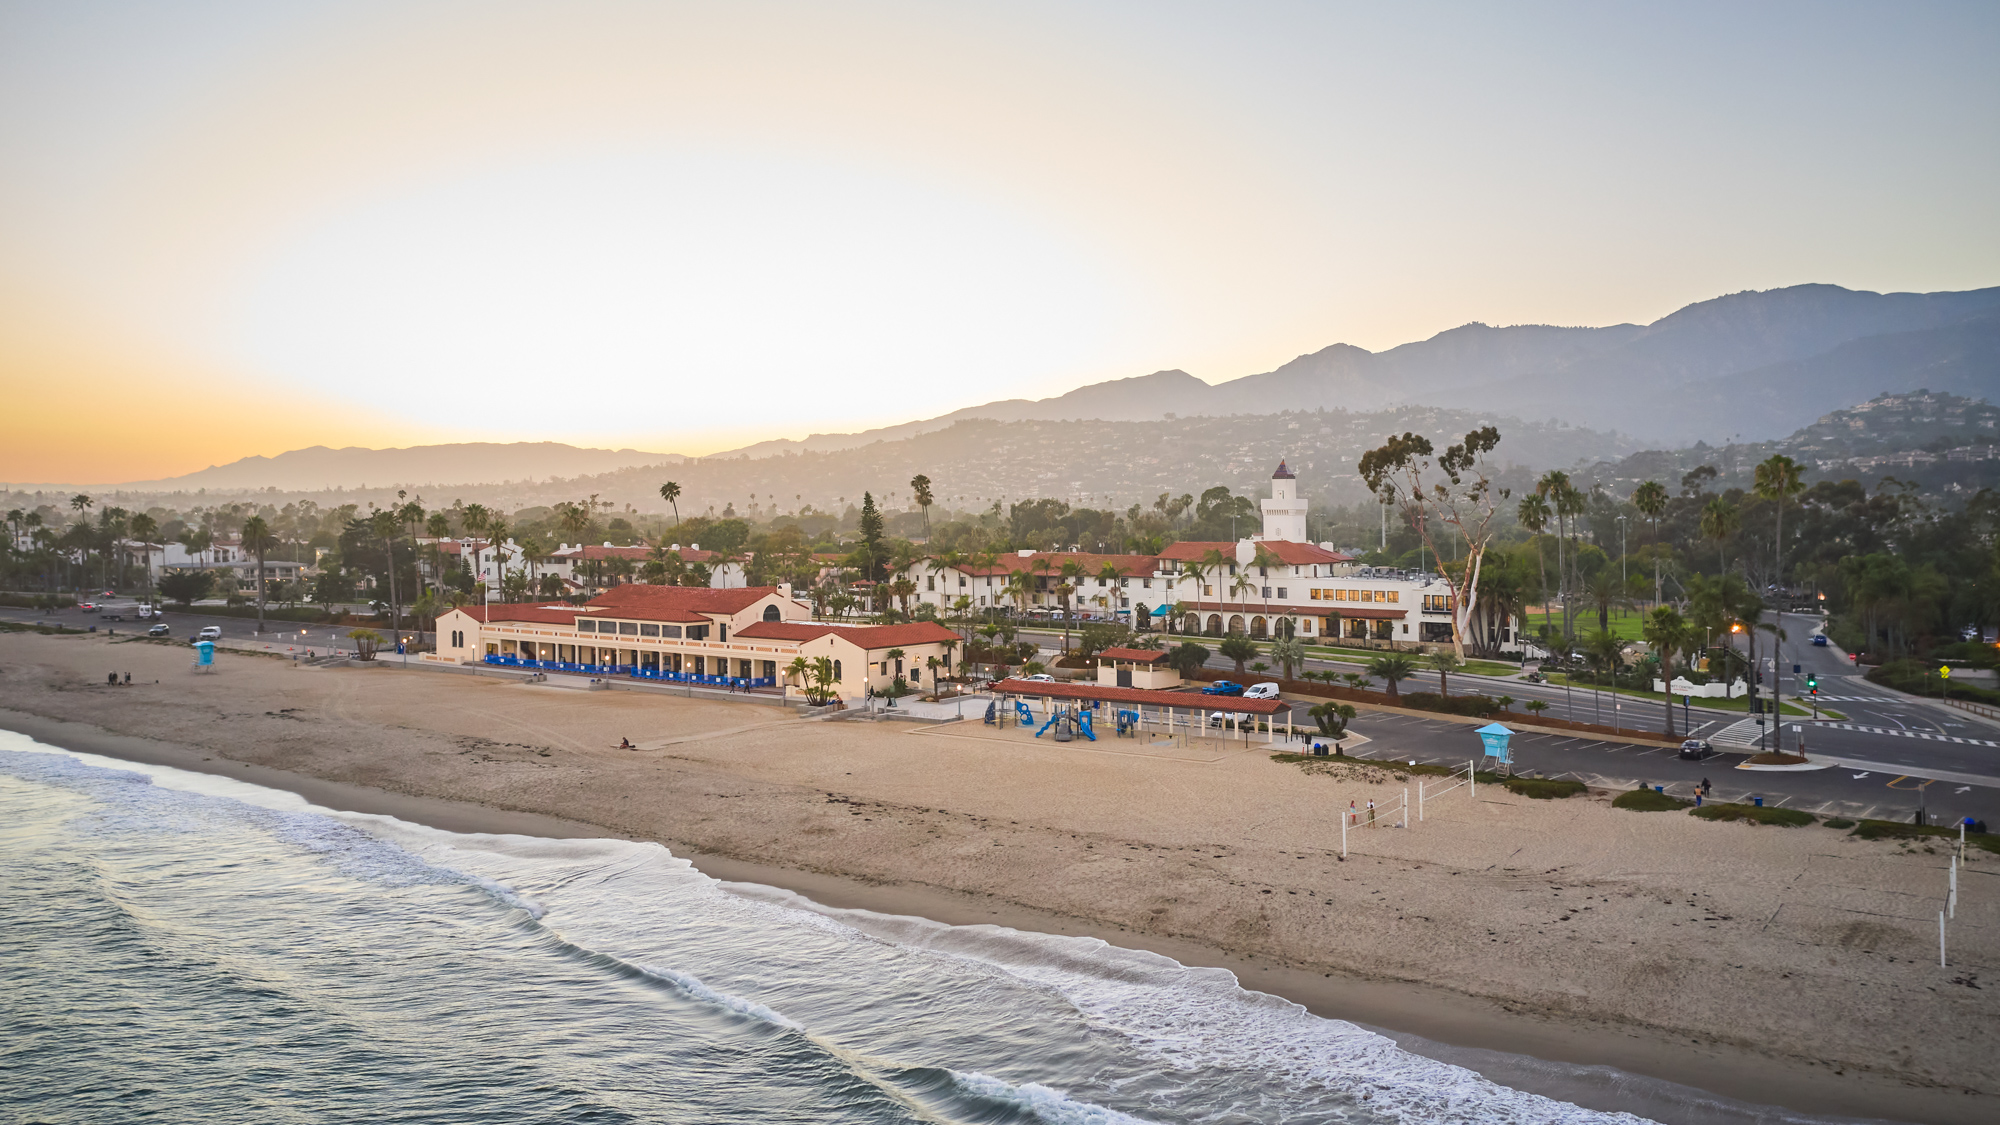 Aerial view of sandy beach at sunset with people on it near ocean with Mar Monte Hotel in Santa Barbara, CA behind the beach with mountains in the background